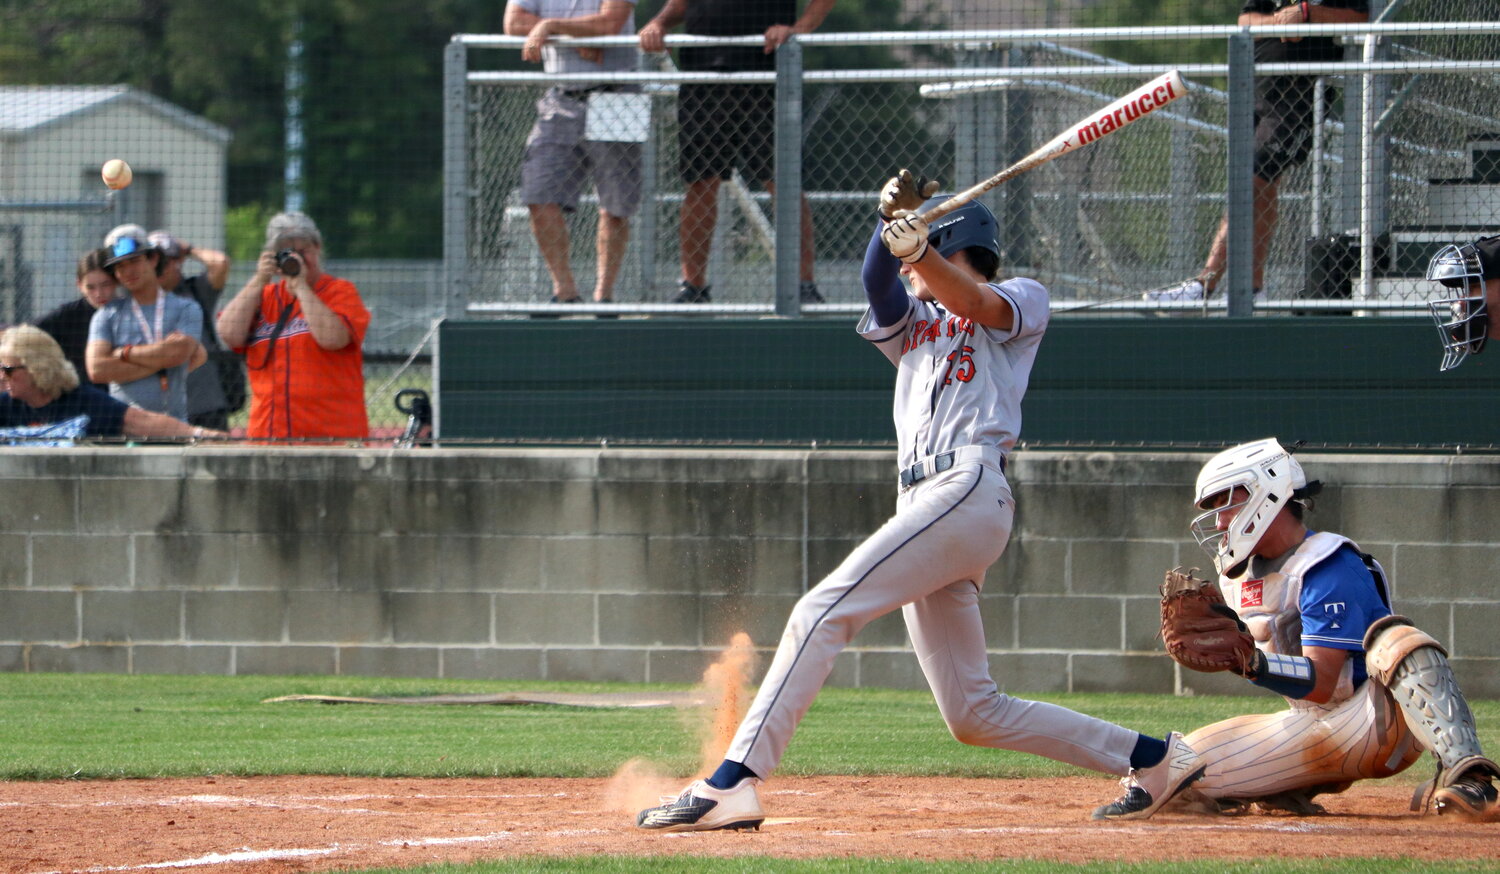 Ty Berra hits during Monday's District 19-6A play-in game between Seven Lakes and Taylor at the Mayde Creek baseball field.